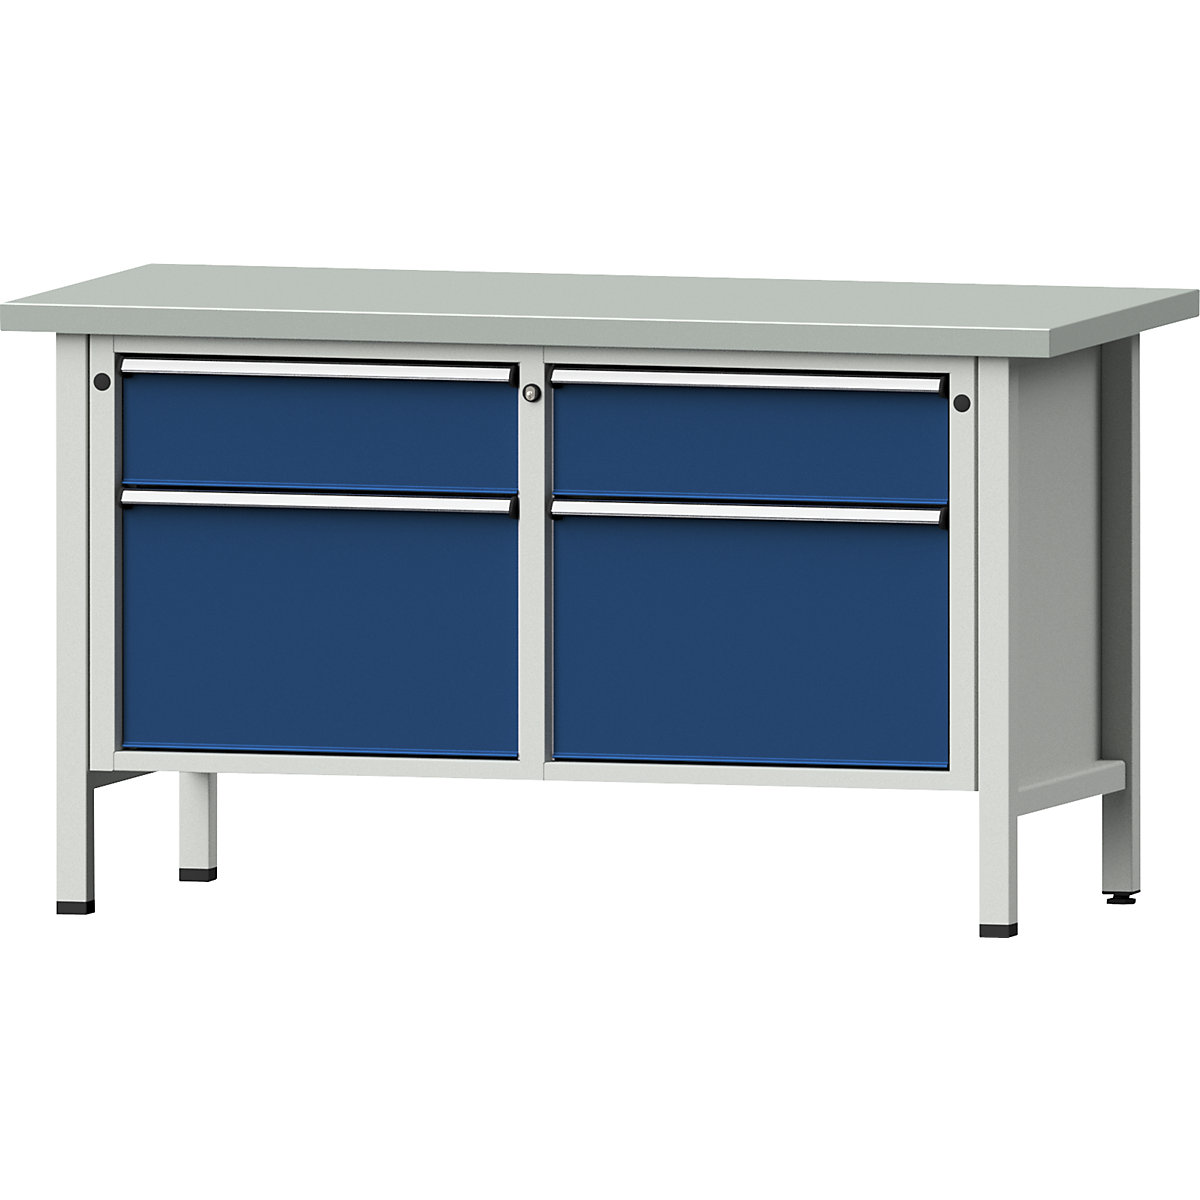 Workbench, frame construction – ANKE, 2 drawers 180 mm, 2 drawers 360 mm, sheet steel covering, full extension-10